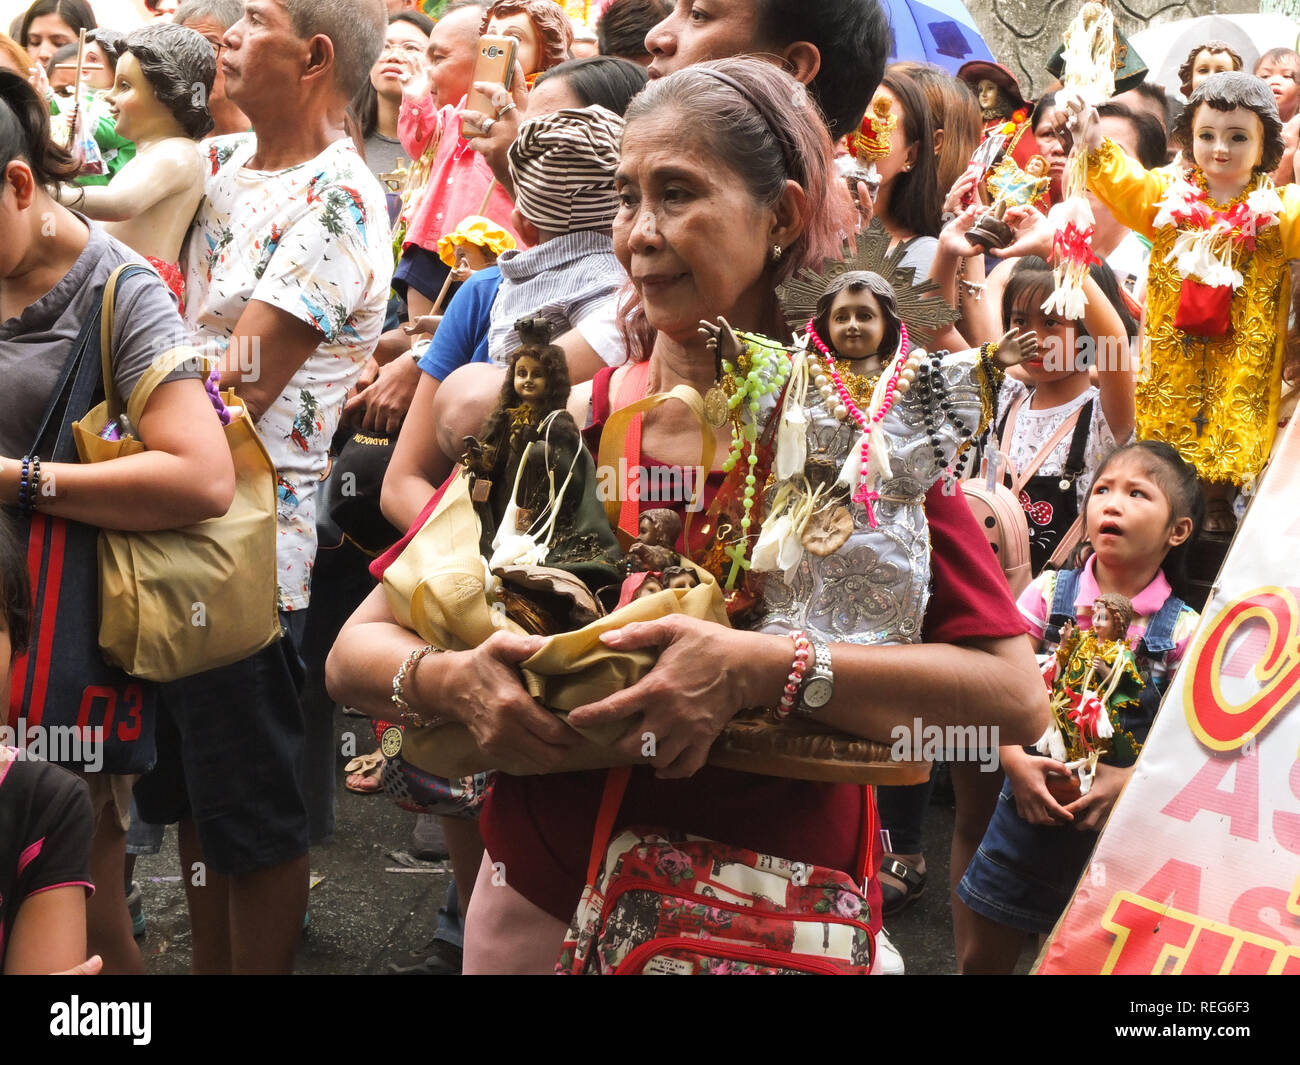 An old woman carrying her Sto. Niños during the Feast of the Sto. Niños in Tondo. Catholic Devotees bring their Sto. Niños to be blessed by holy water by the parish priest of Tondo church to celebrate the Feast of the Santo Niño (Child Jesus). Stock Photo